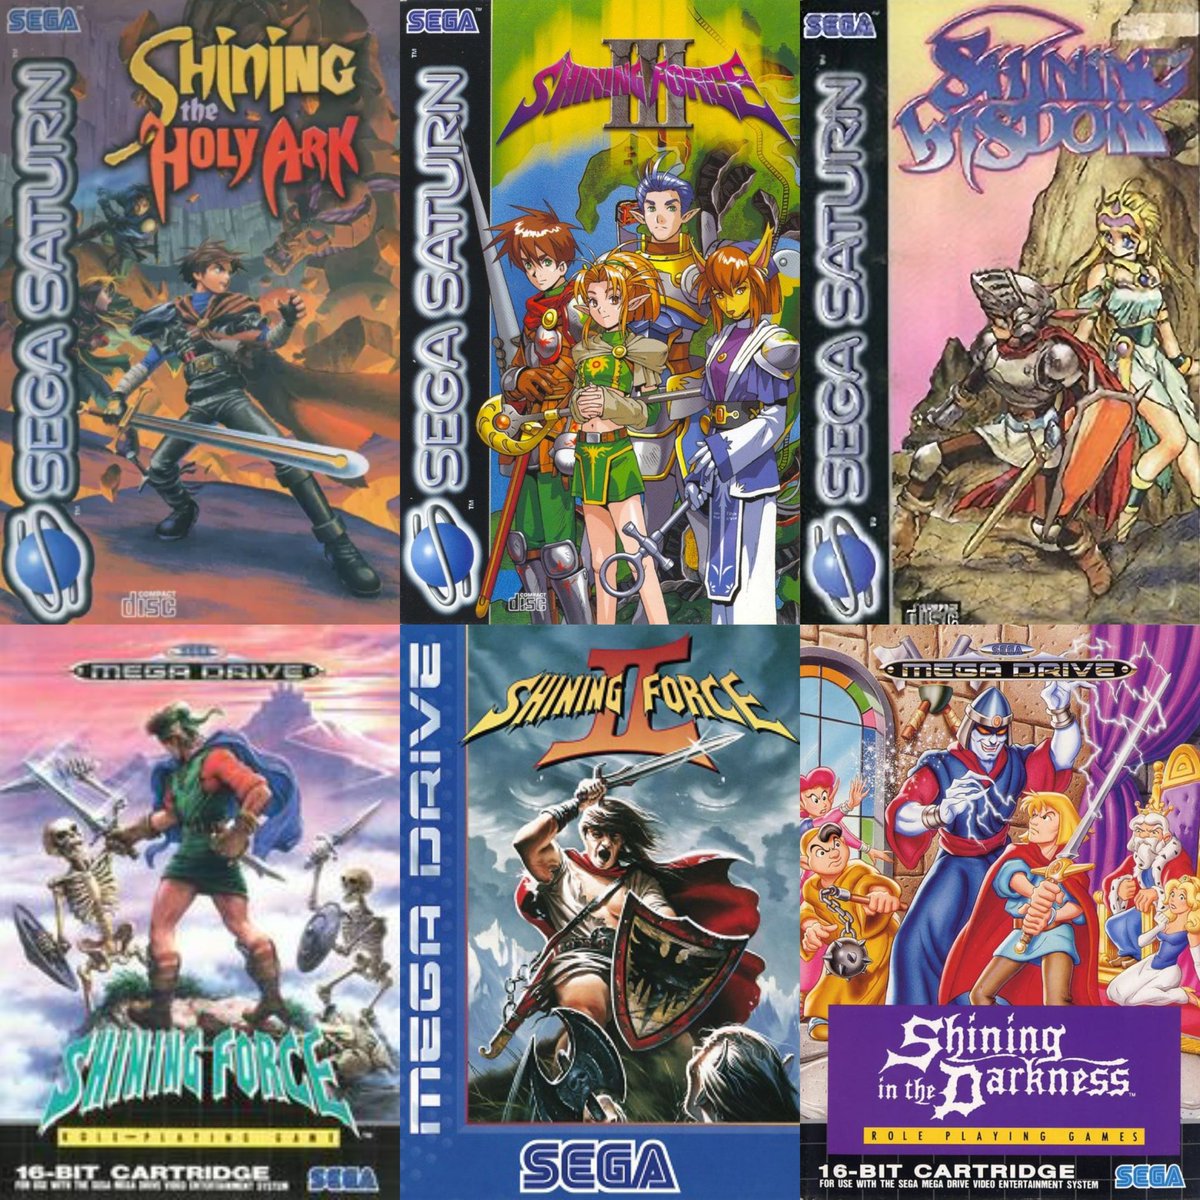 Remember to play the #ShiningForce games on Sega Saturn and #ChangeTheNarrative

Or play them on the Mega Drive. Either way, you can't go wrong.
@SEGA @SEGA_OFFICIAL